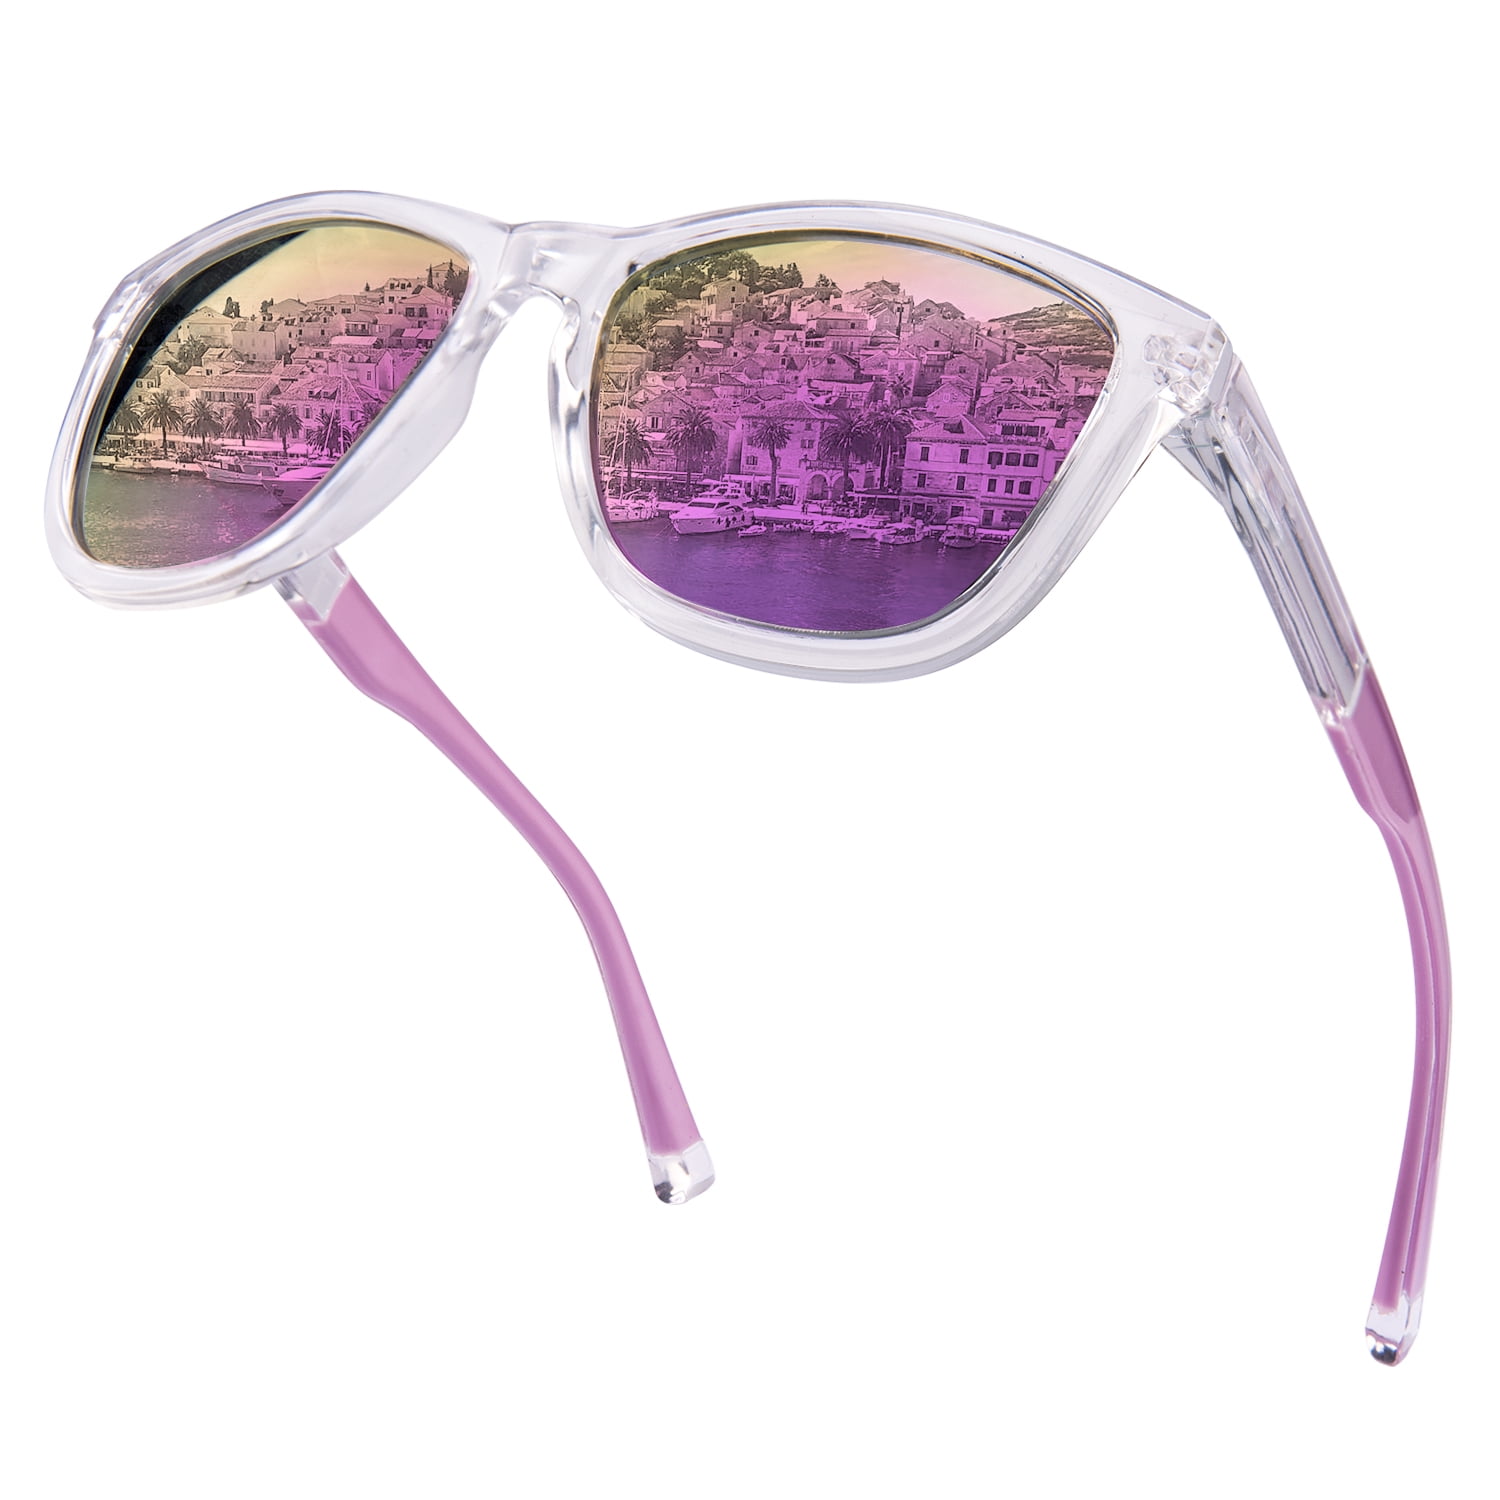 This Summer's Hottest Look: Rose Gold Mirror Sunglasses | Fashion &  Lifestyle - SelectSpecs.com